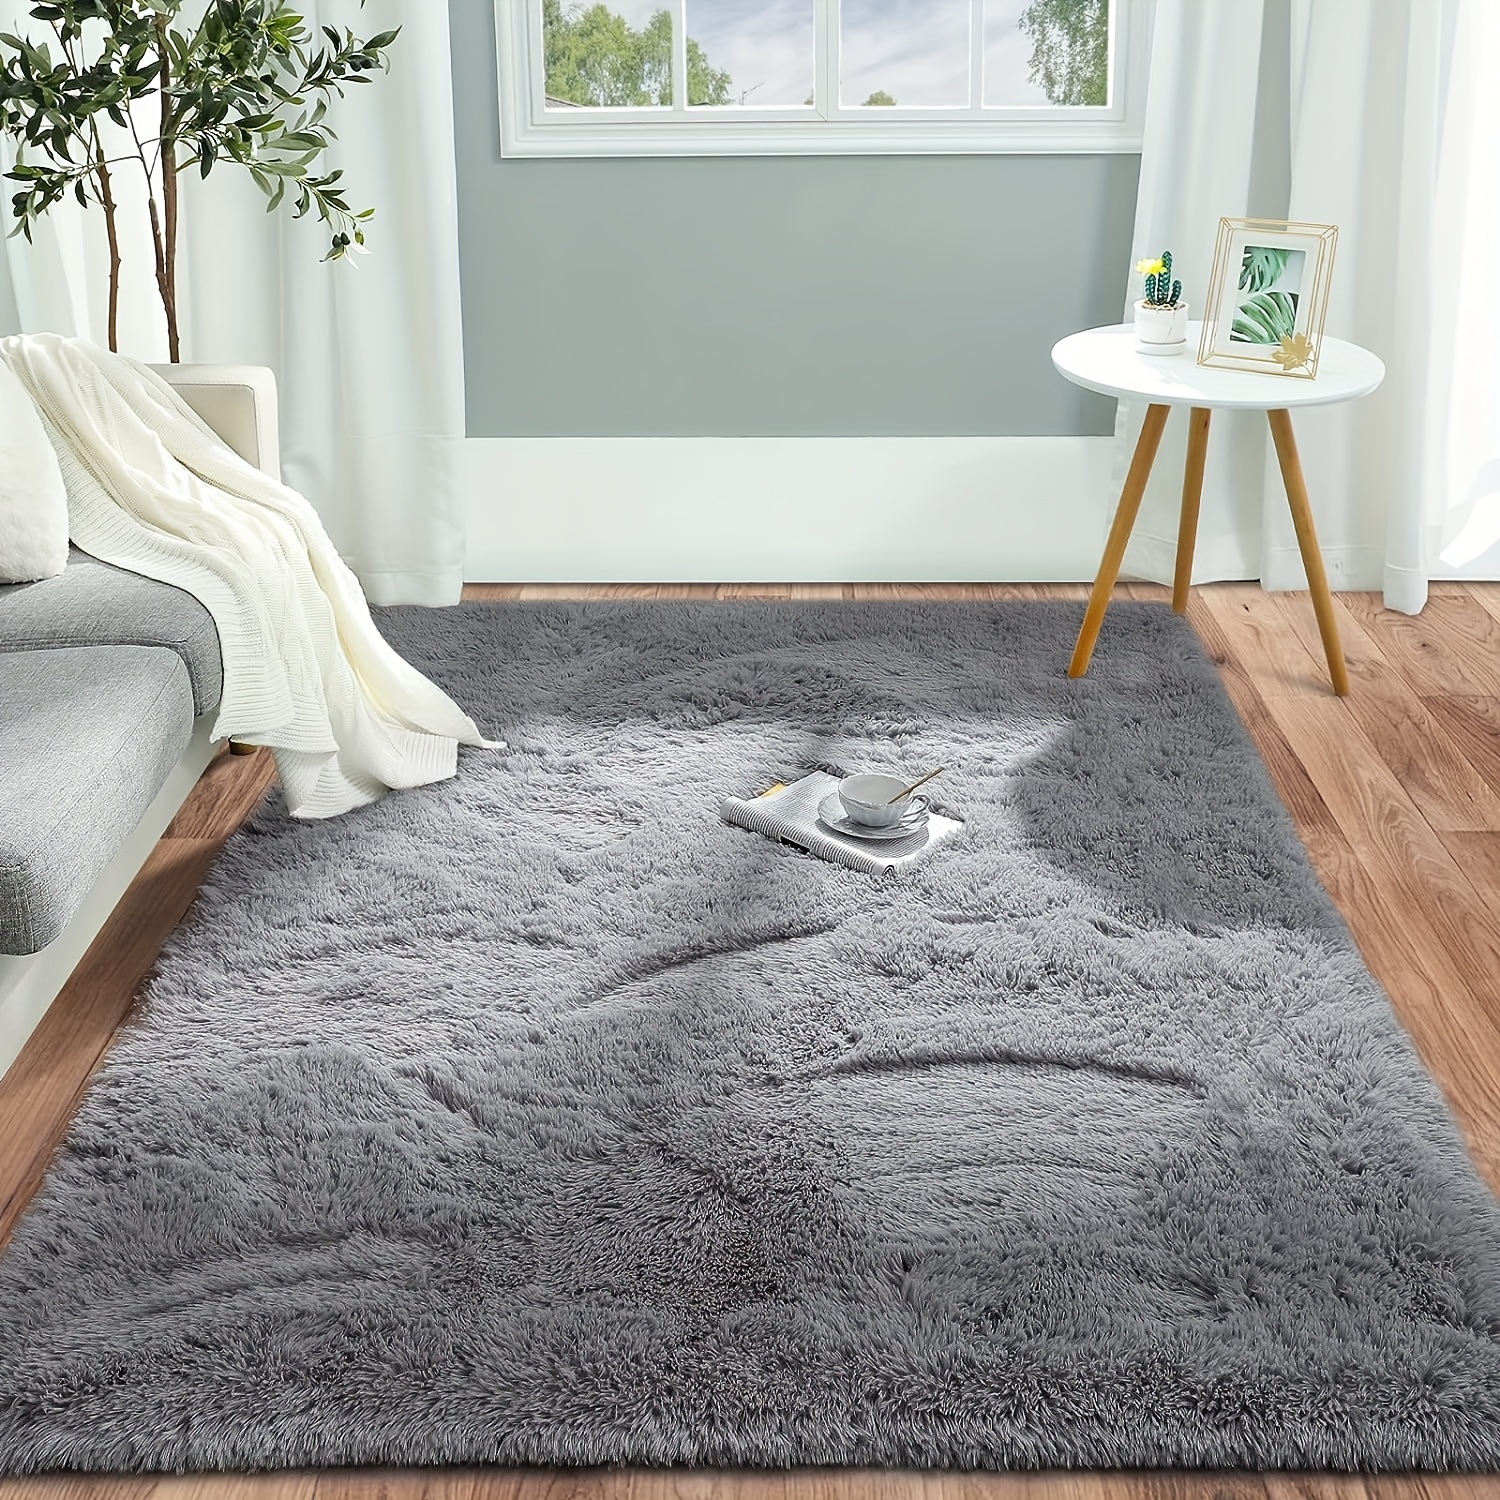 Buy Grey Rugs, Carpets & Dhurries for Home & Kitchen by AAZEEM